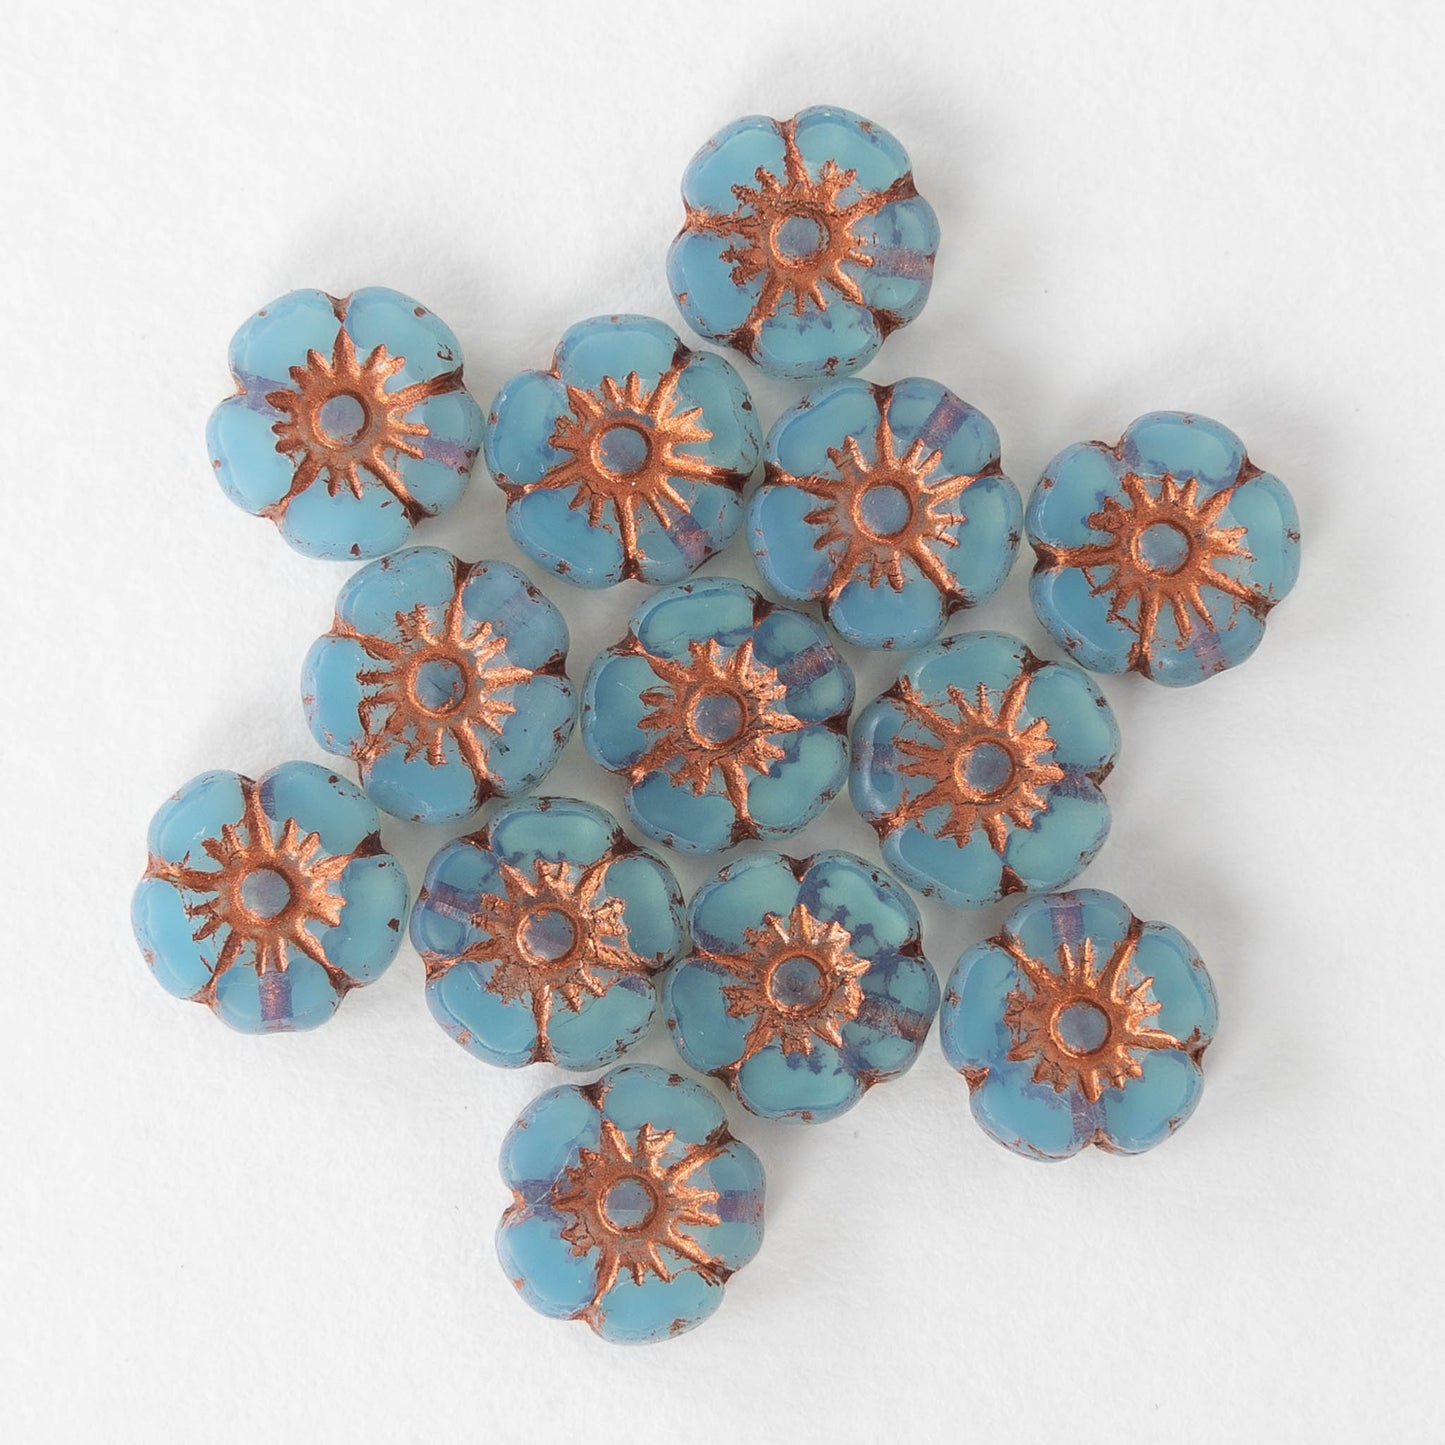 9mm Glass Flower Beads - Dusty Blue with Copper Wash - 16 beads